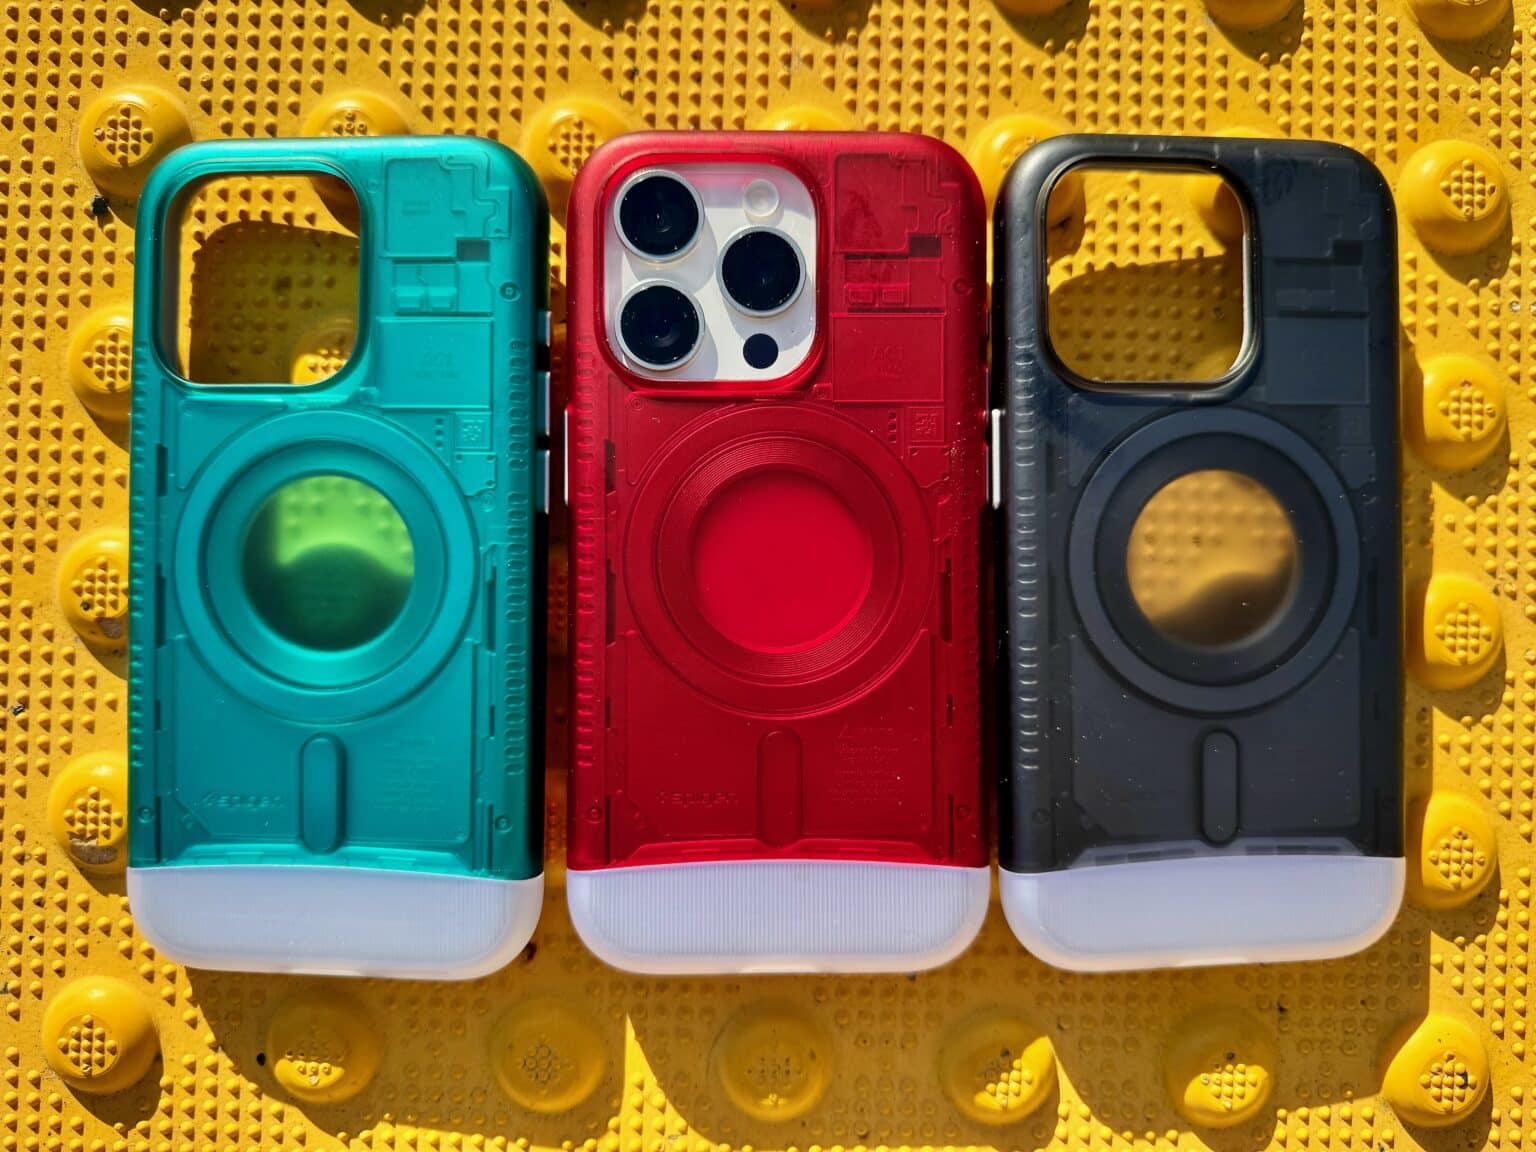 Three of Spigen's limited-edition Classic C1 MagFit cases, inspired by 1998's iconic iMac G3.